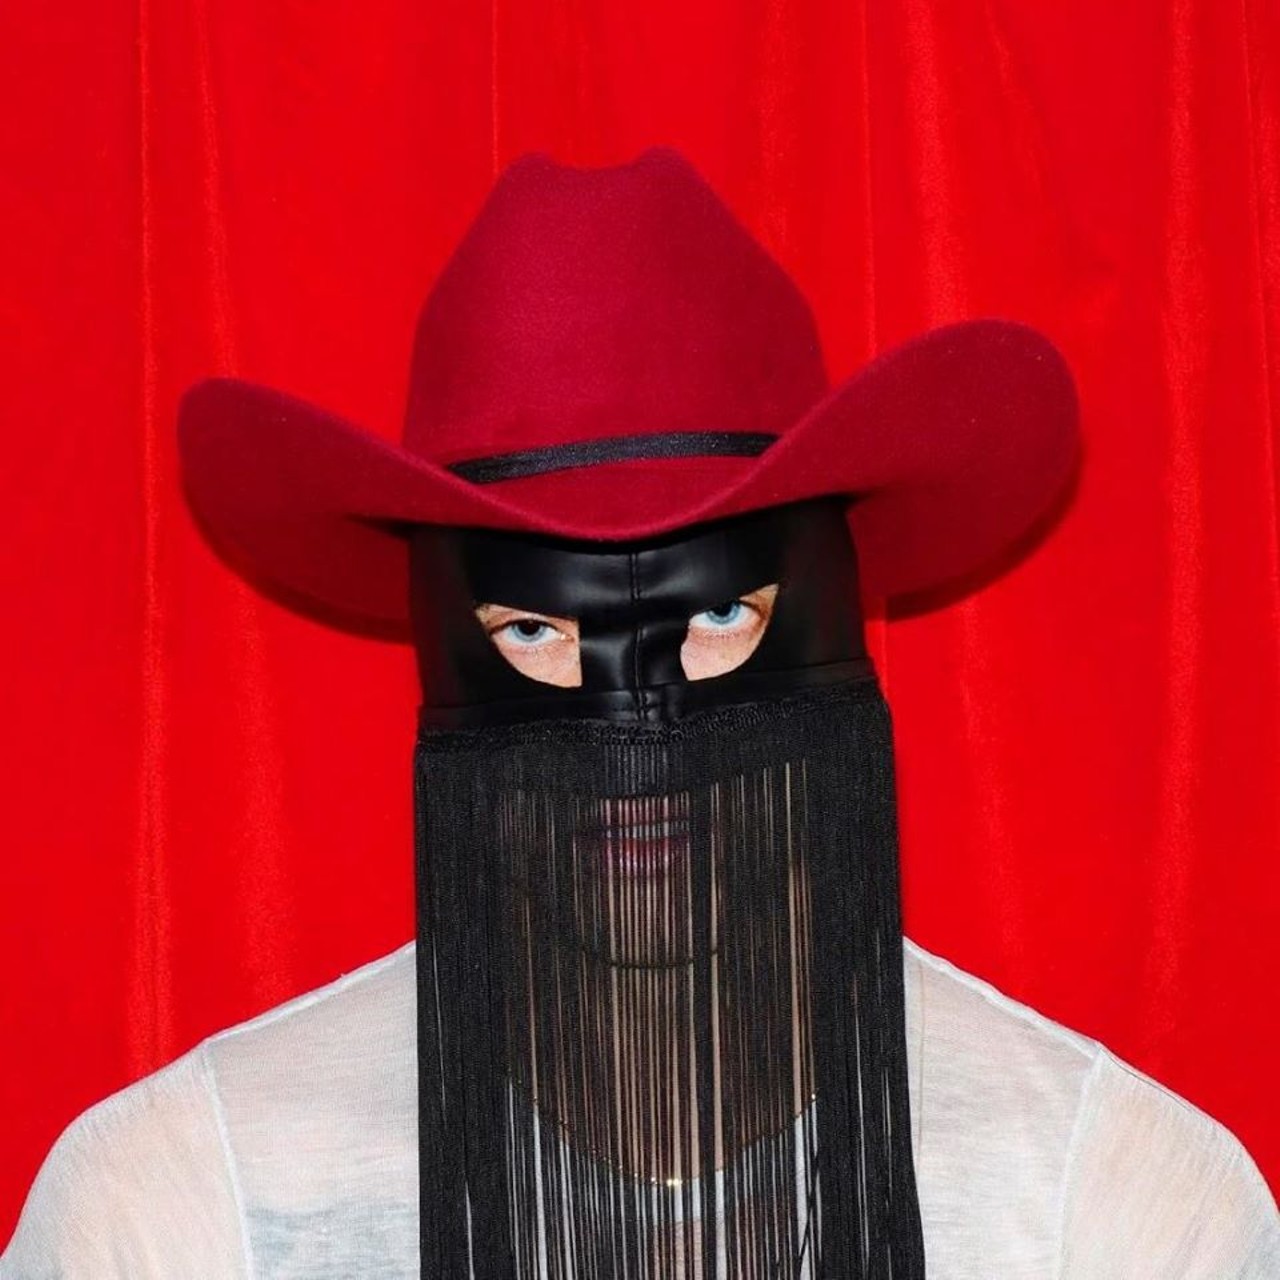 Orville Peck
$25-$125, Sunday, March 15, 8pm, Paper Tiger, 2410 N. St. Mary’s St., papertigersatx.com
Queer, country and sexy as fuck, Orville Peck is putting the cunt in country.
Photo via Facebook / Orville Peck